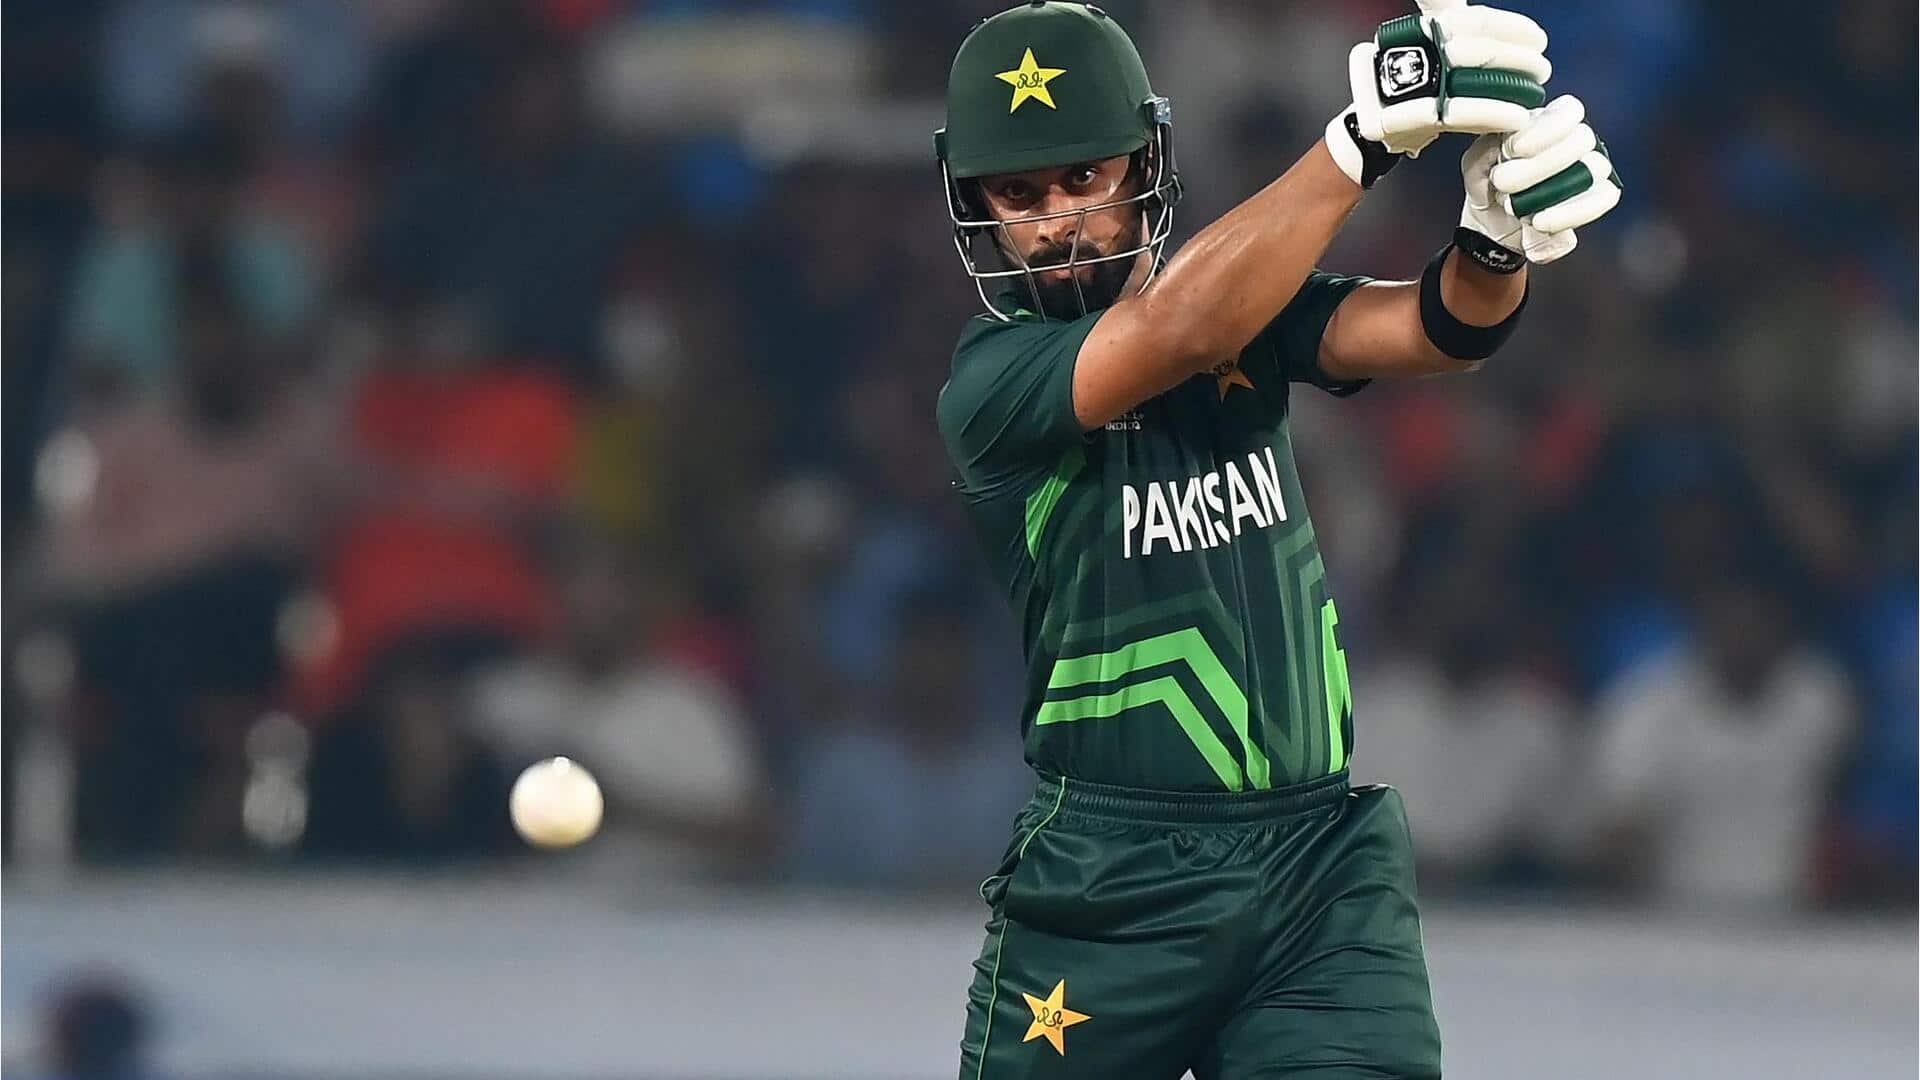 Pakistan's Abdullah Shafique smashes century on World Cup debut